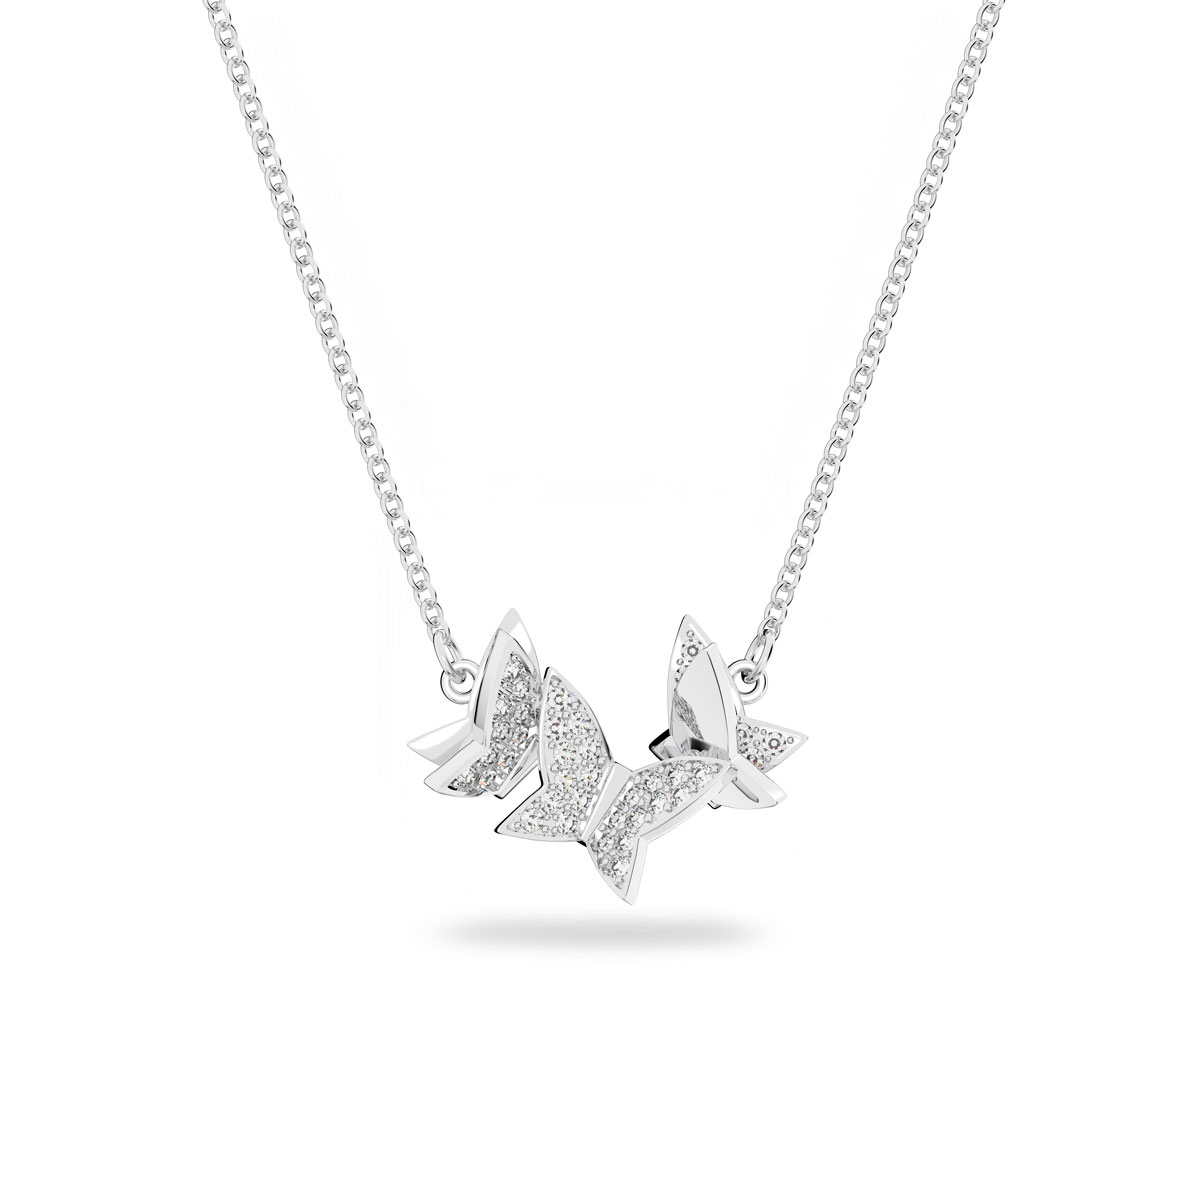 Swarovski Crystal and Rhodium Lilia Butterfly Pendant Necklace